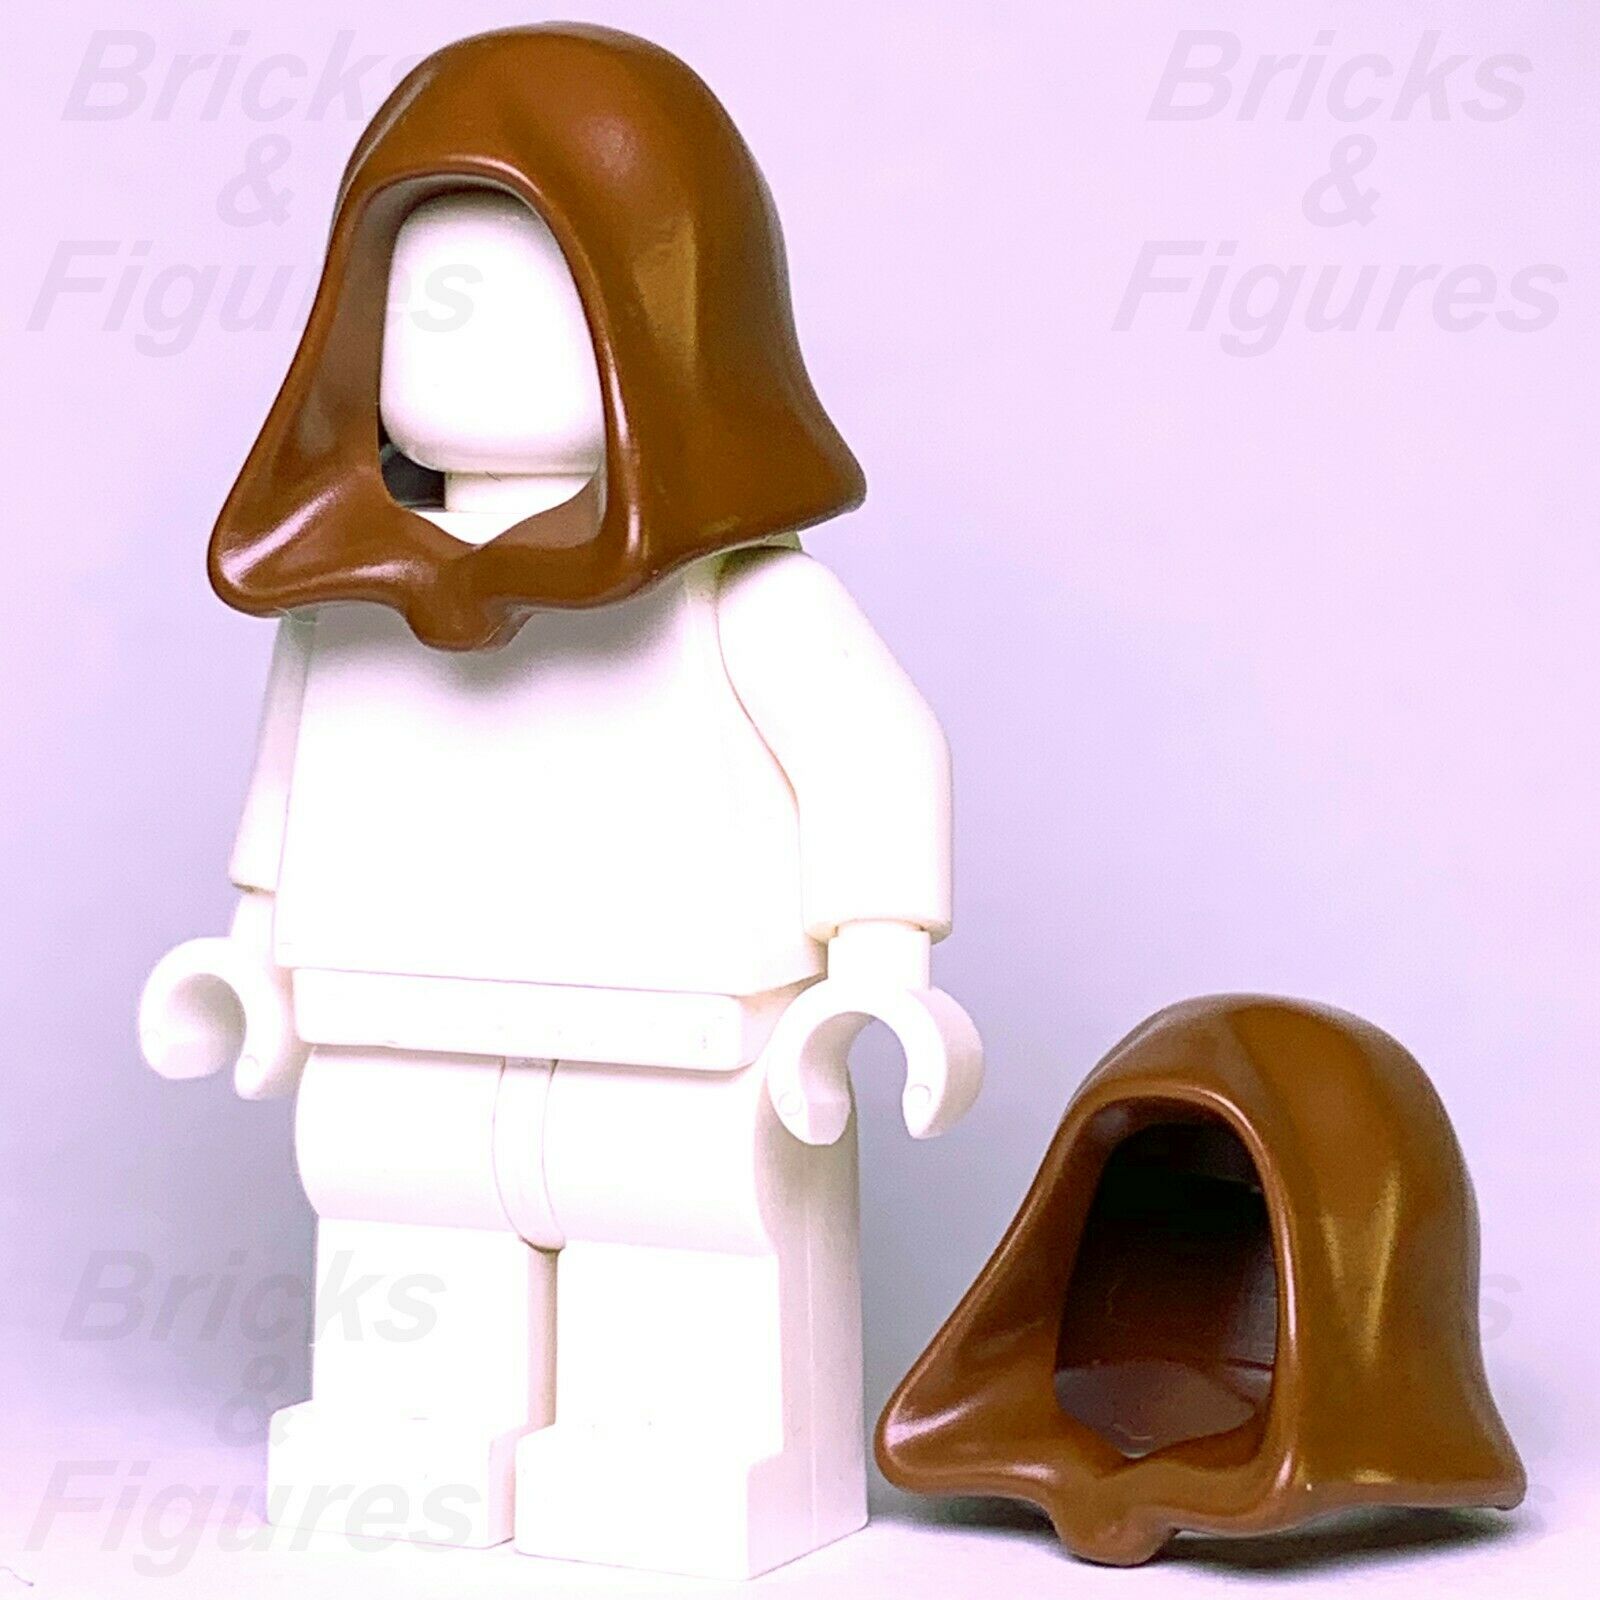 2 x Star Wars LEGO Brown Robe Hoods for Sith Lord & Jedi Minifigs Genuine Parts - Bricks & Figures